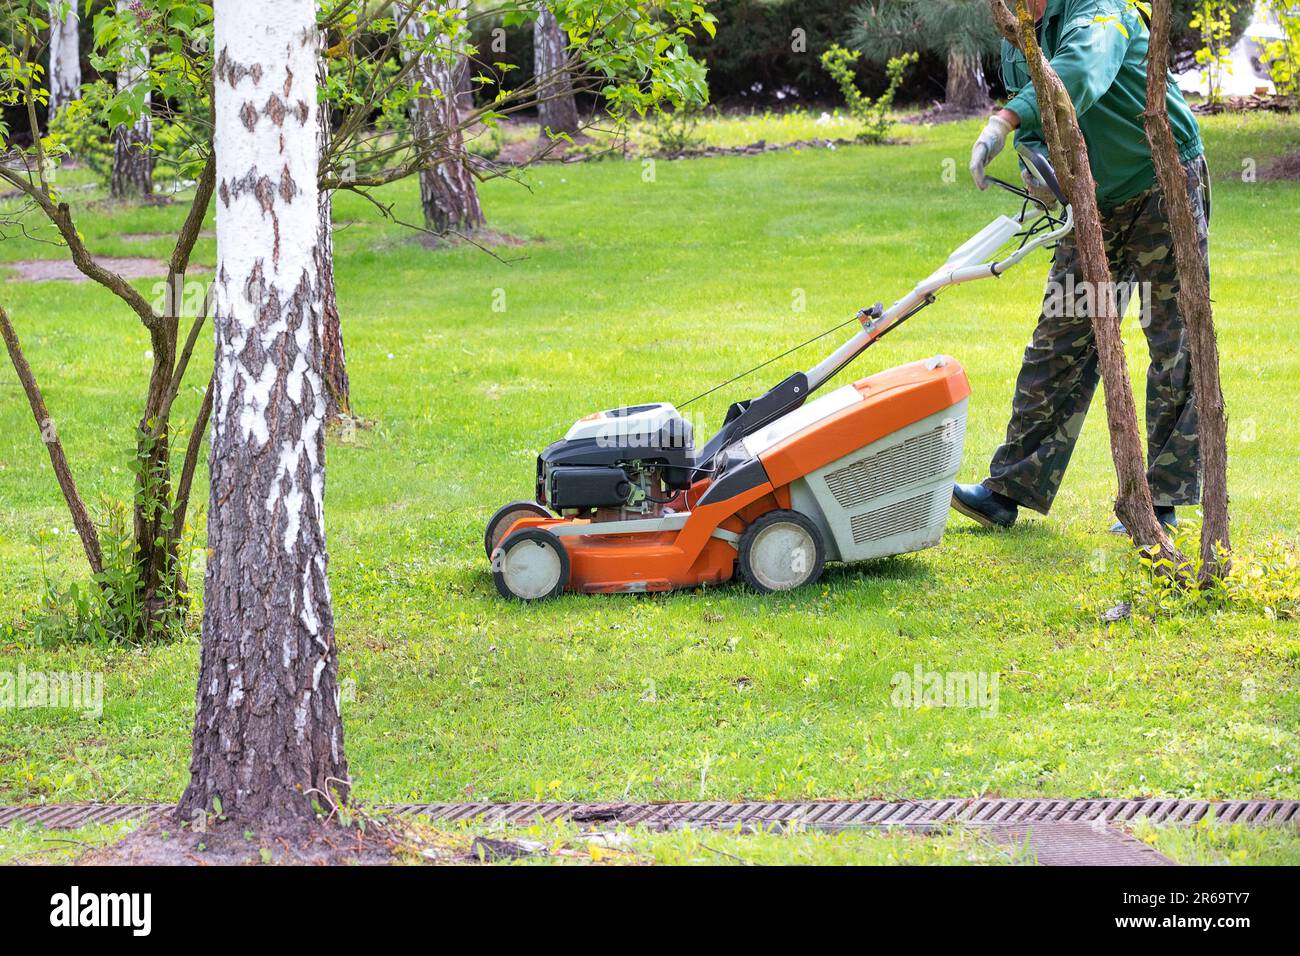 The gardener mows the lawn and takes care of it with a petrol lawn mower in the garden near the trees. Copy space. Stock Photo